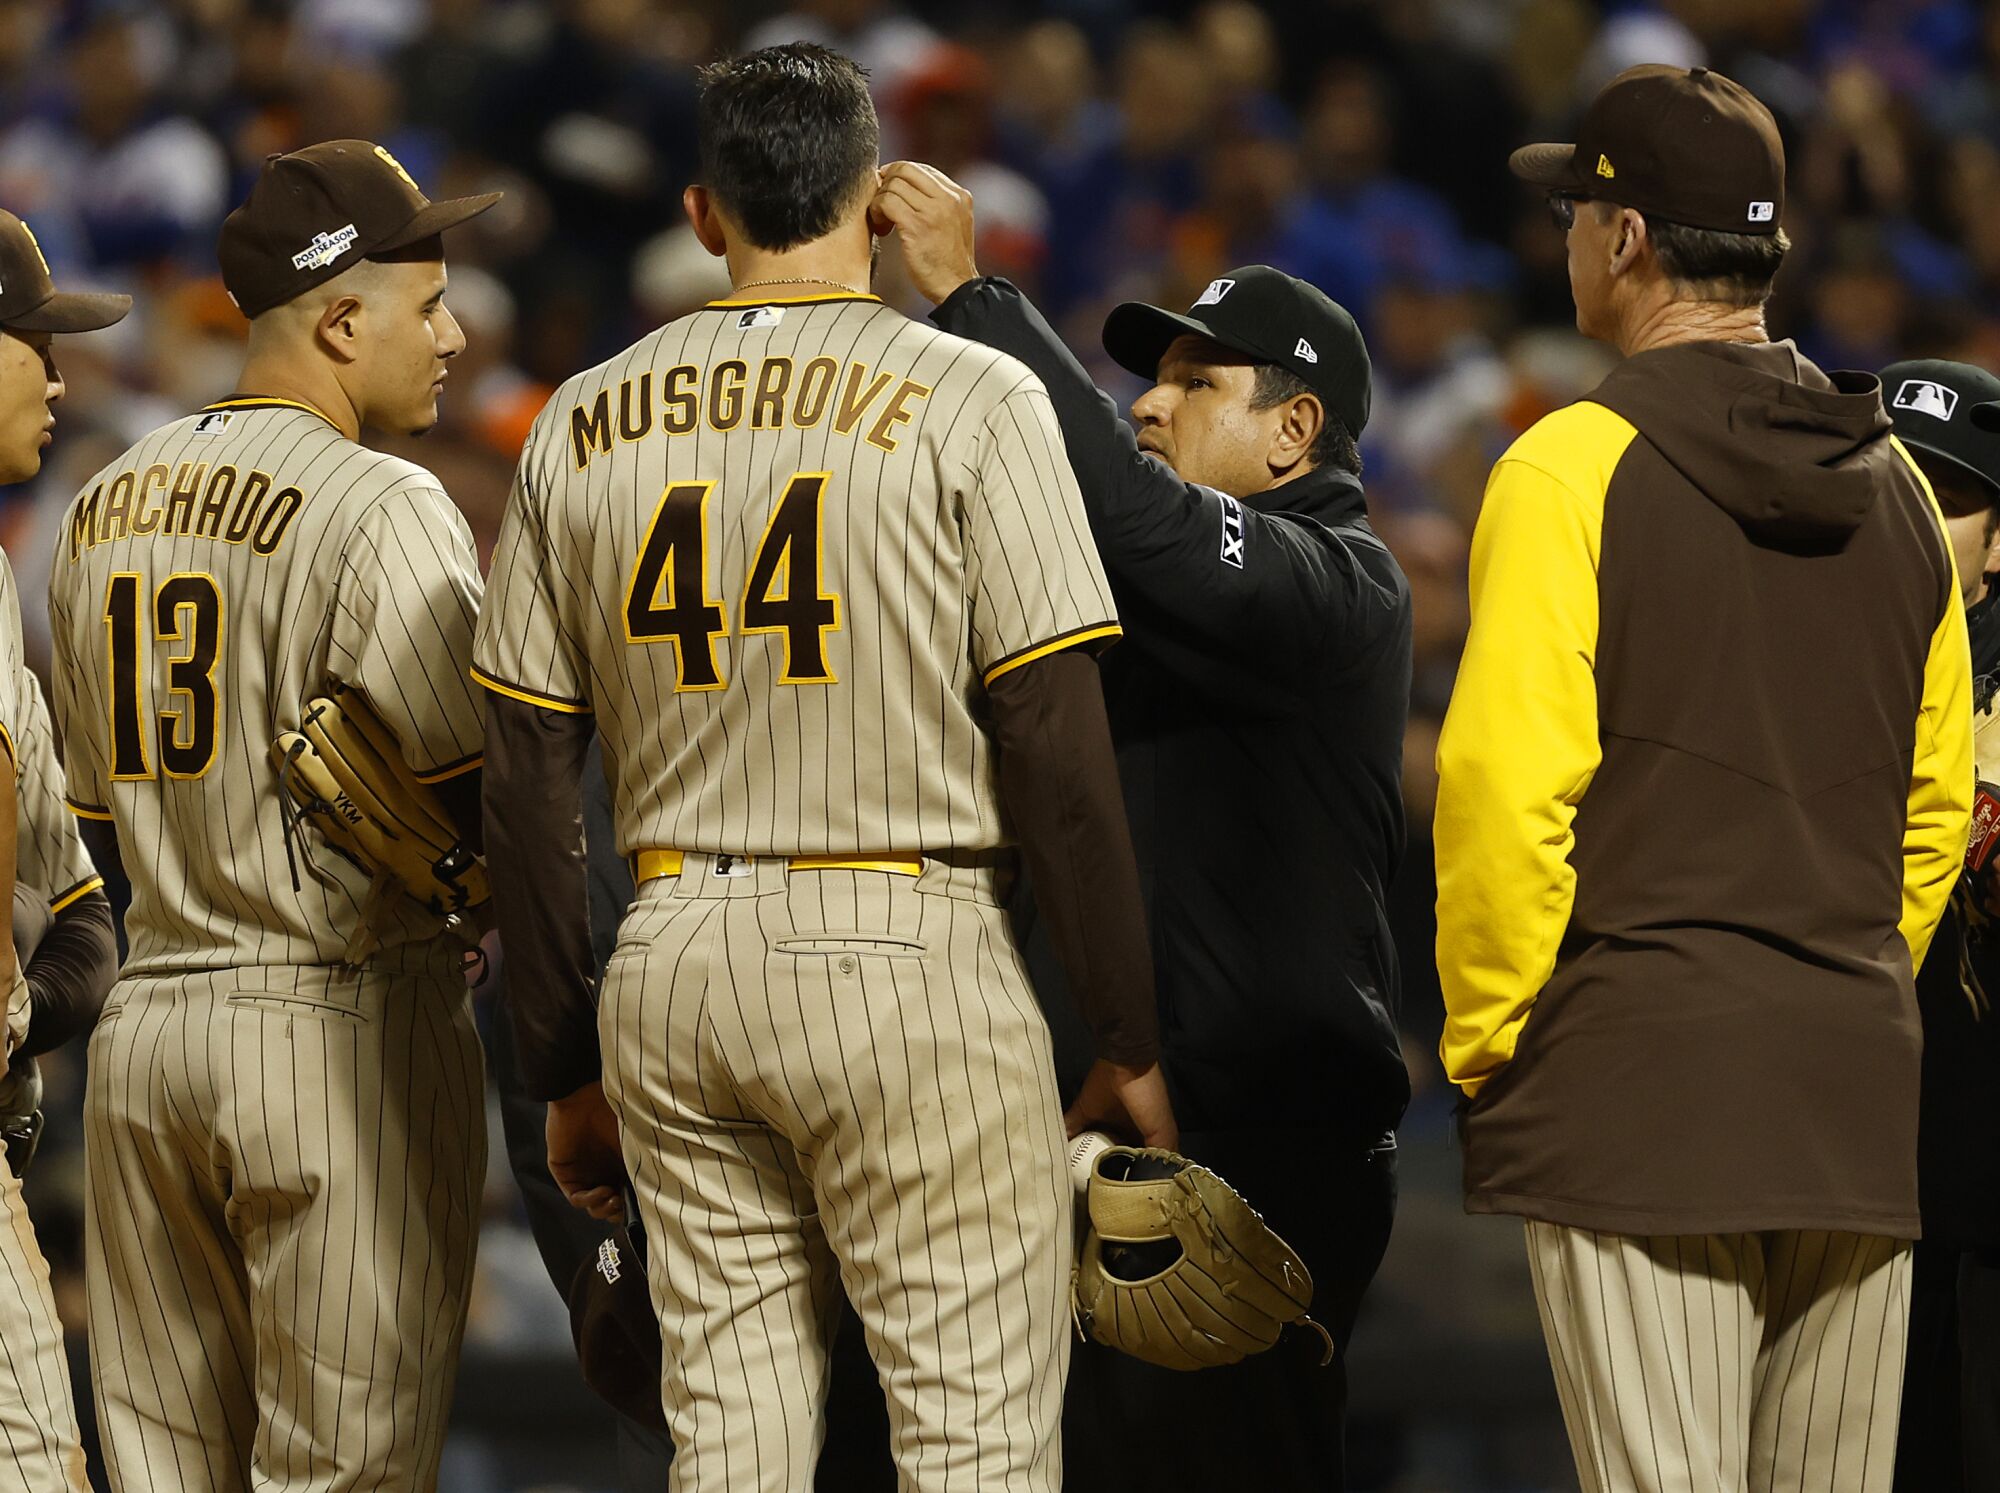 Umpires check Padres pitcher Joe Musgrove after the Mets requested a substance check.